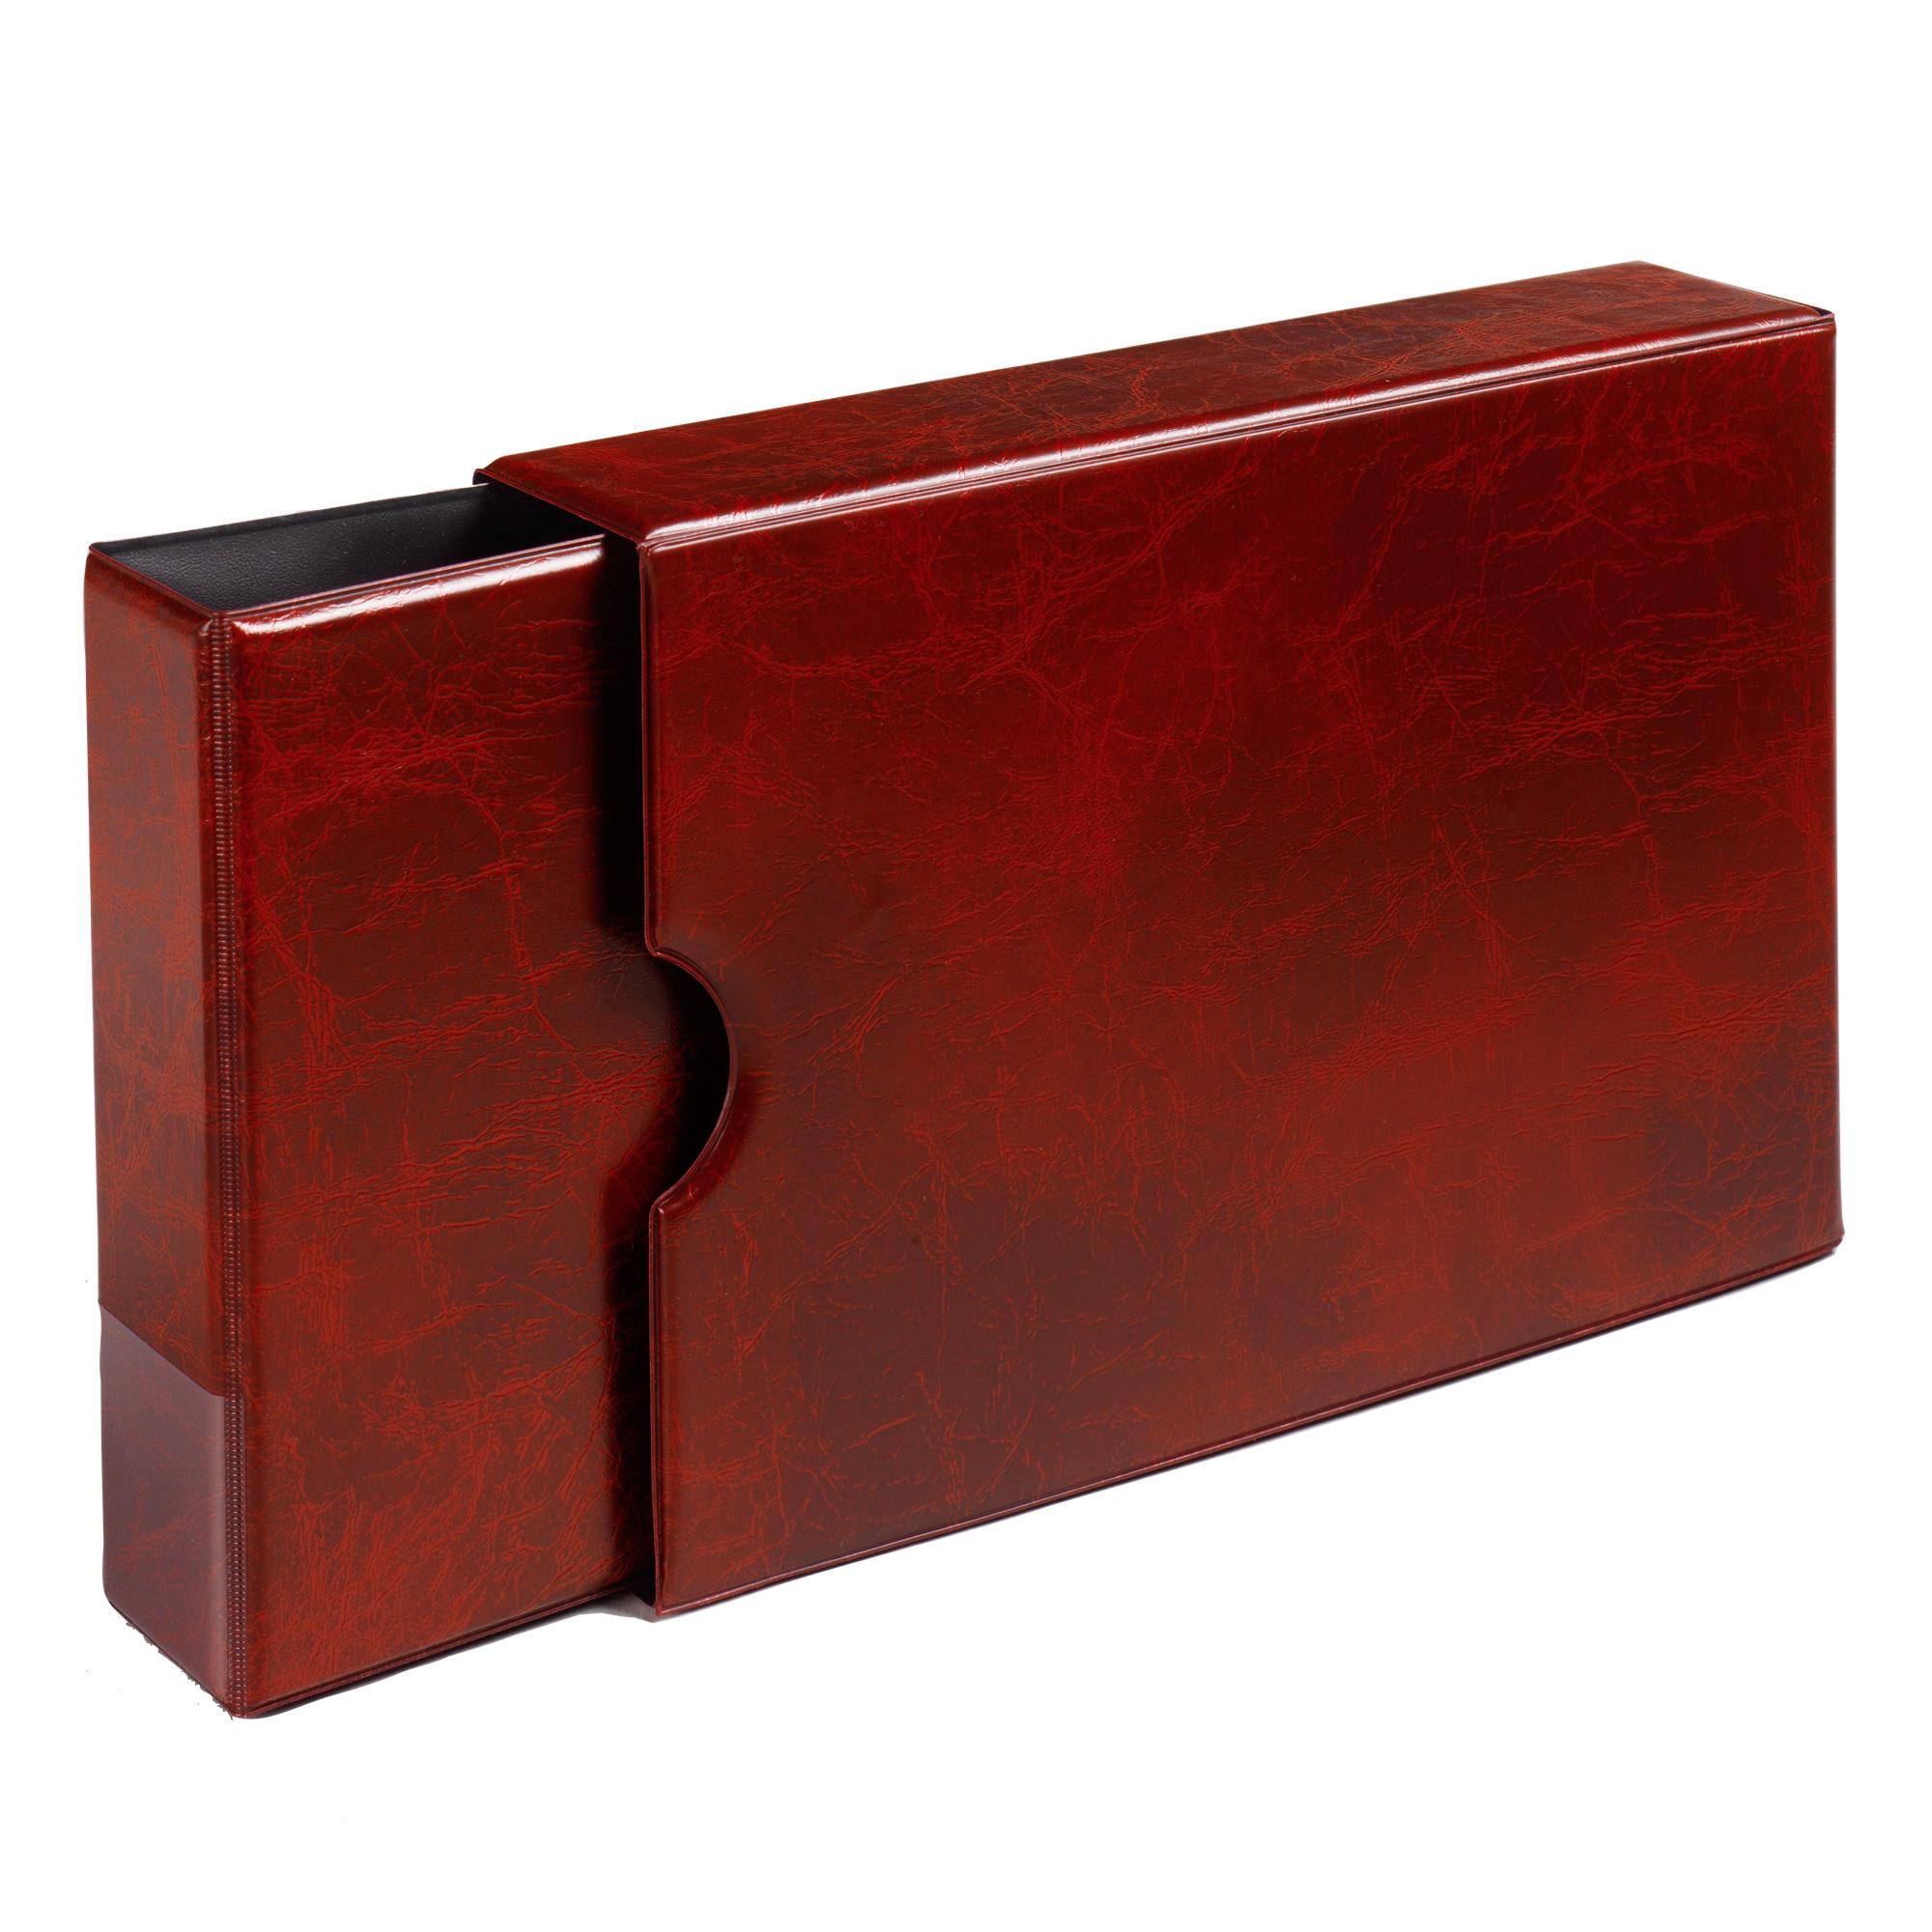 Collectable Cards Landscape Album and Slipcase - Burgundy